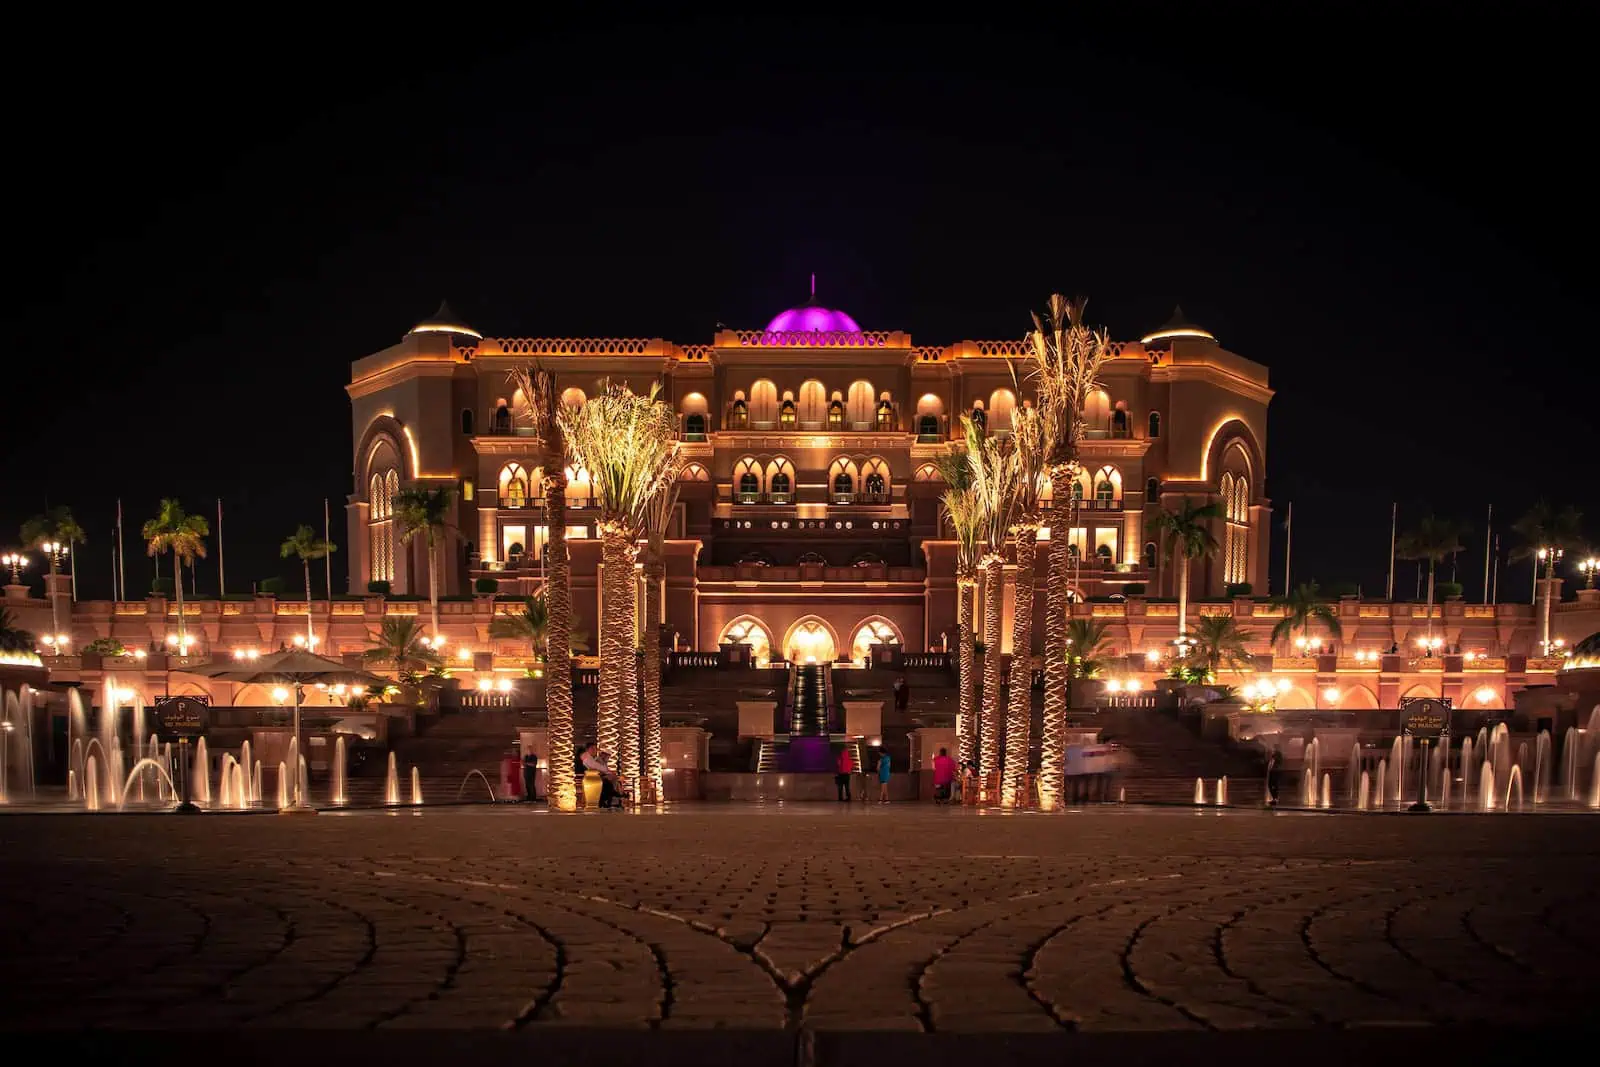 The Emirate palace with lights during nighttime